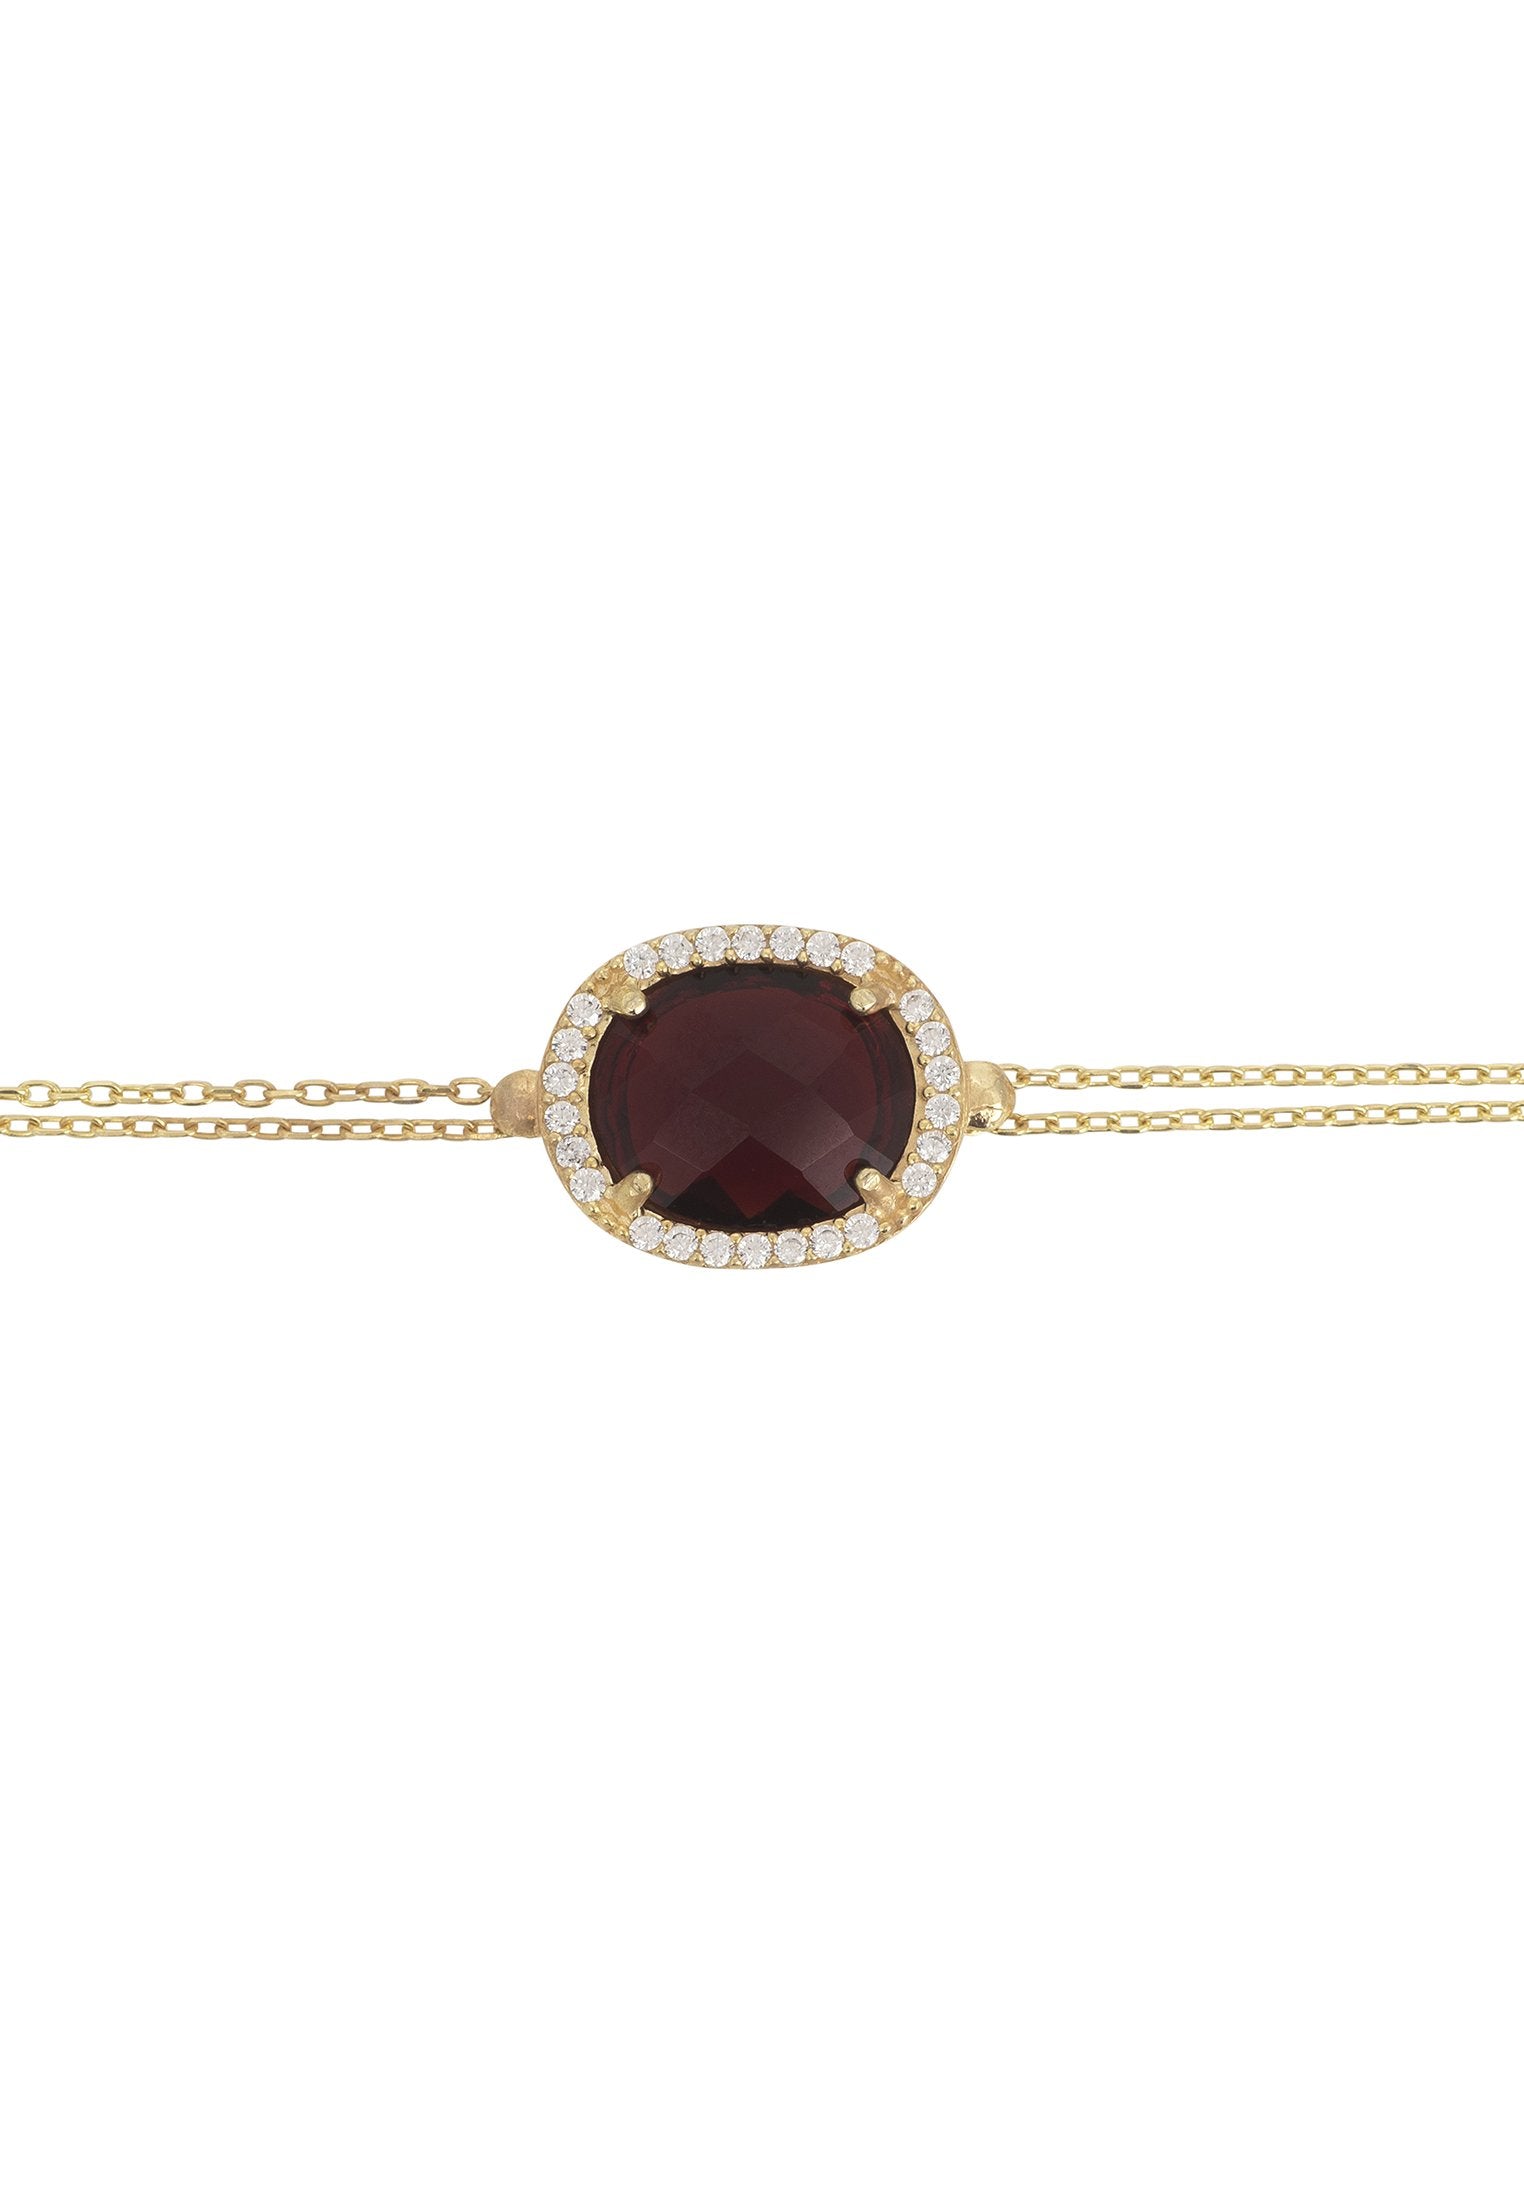 Regal Oval Gemstone Double Chain Bracelet with Garnet and CZ Detailing in Gold - Ideal for Evening Attire - Jewelry & Watches - Bijou Her -  -  - 